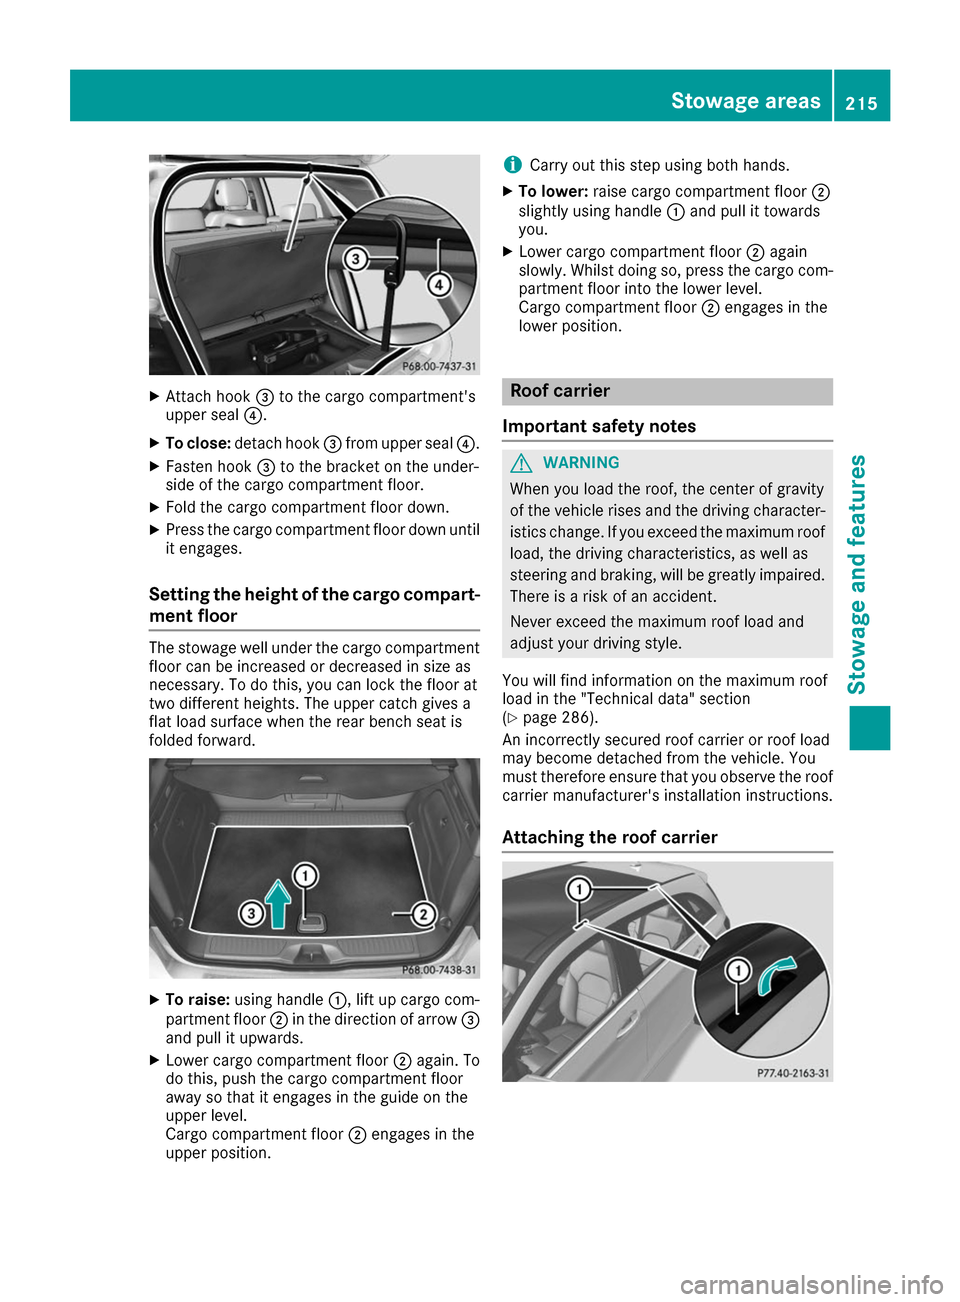 MERCEDES-BENZ B-Class 2017 W246 Owners Manual X
Attach hook 0087to the cargo compartments
upper seal 0085.
X To close: detach hook 0087from upper seal 0085.
X Fasten hook 0087to the bracket on the under-
side of the cargo compartment floor.
X Fo